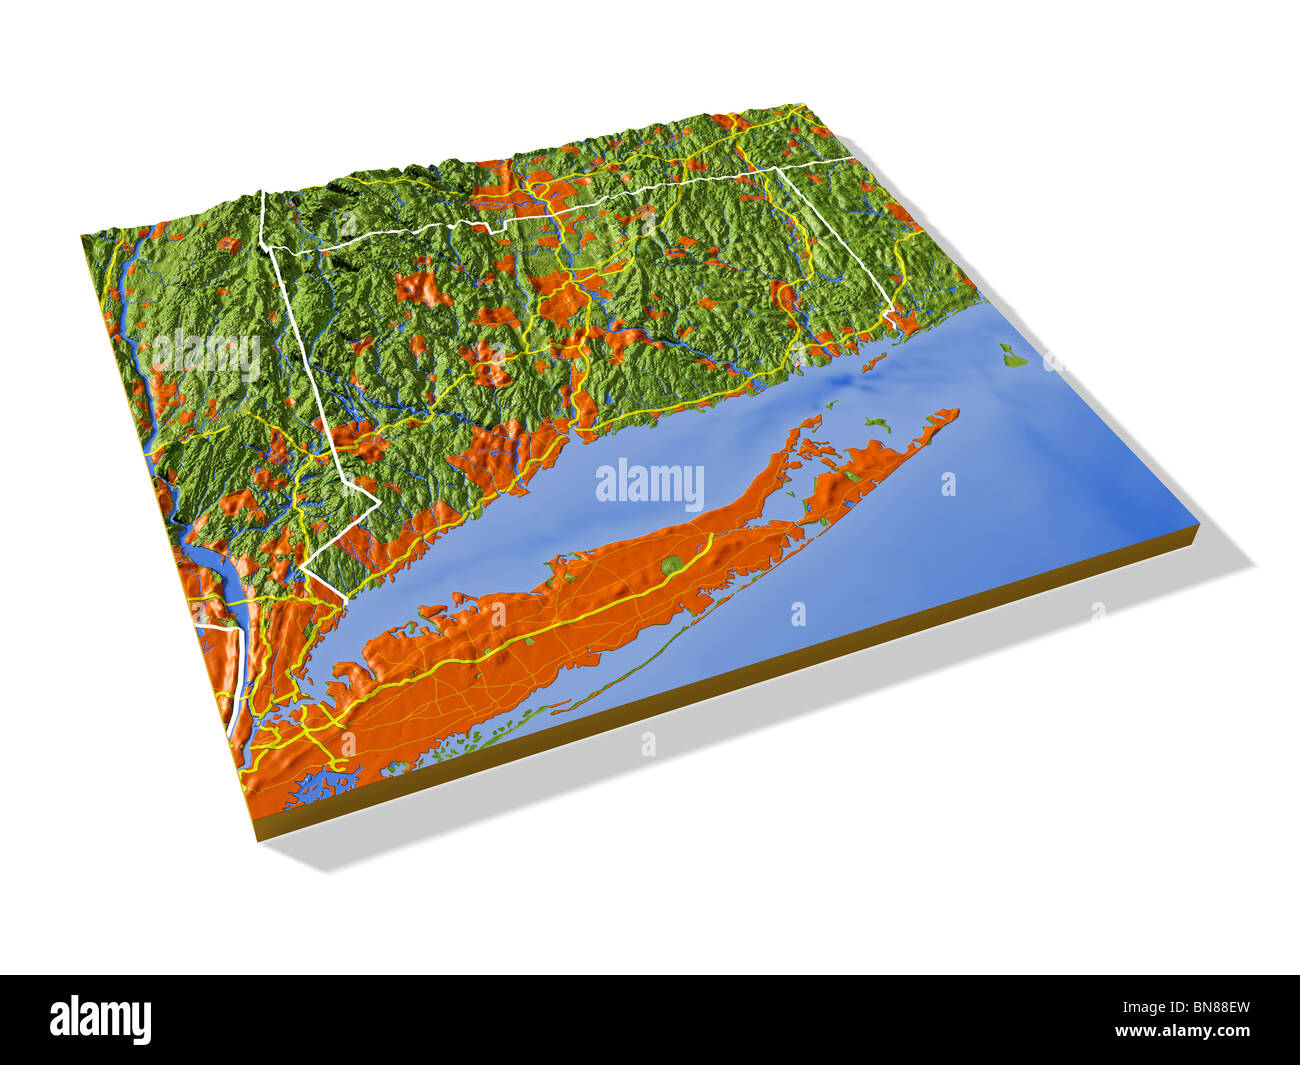 Connecticut, 3D relief map with urban areas, interstate highways and borders. Stock Photo